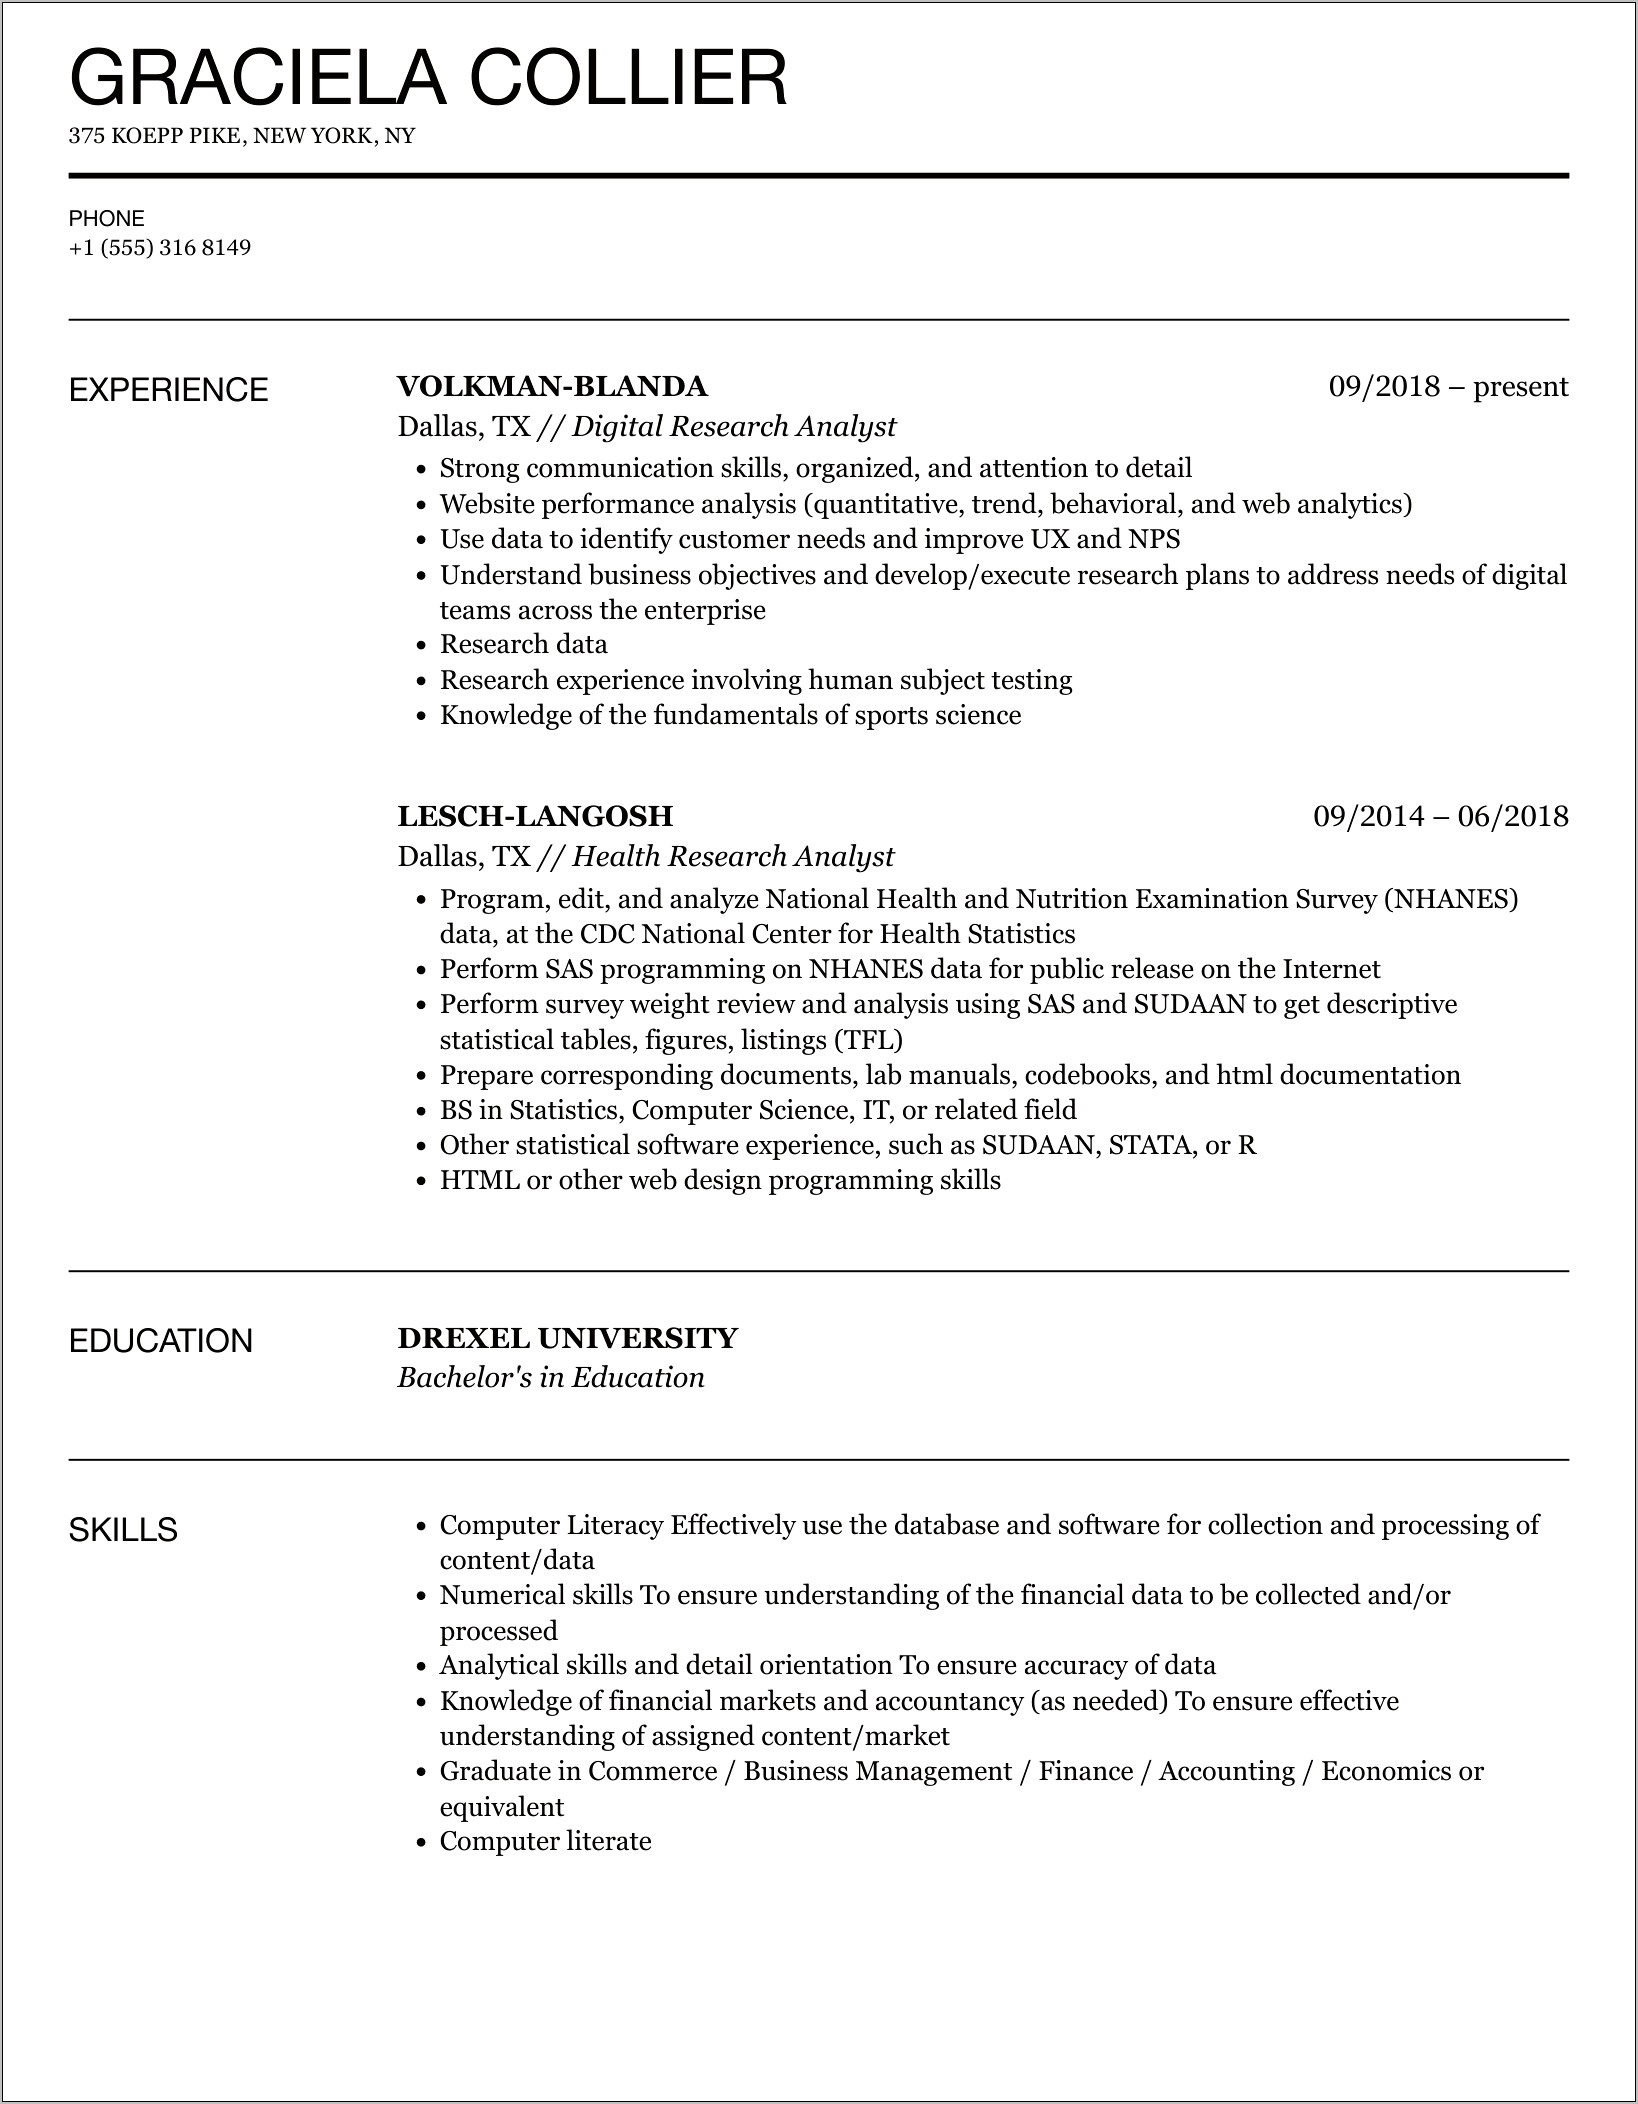 Resume Objective For Research Analyst